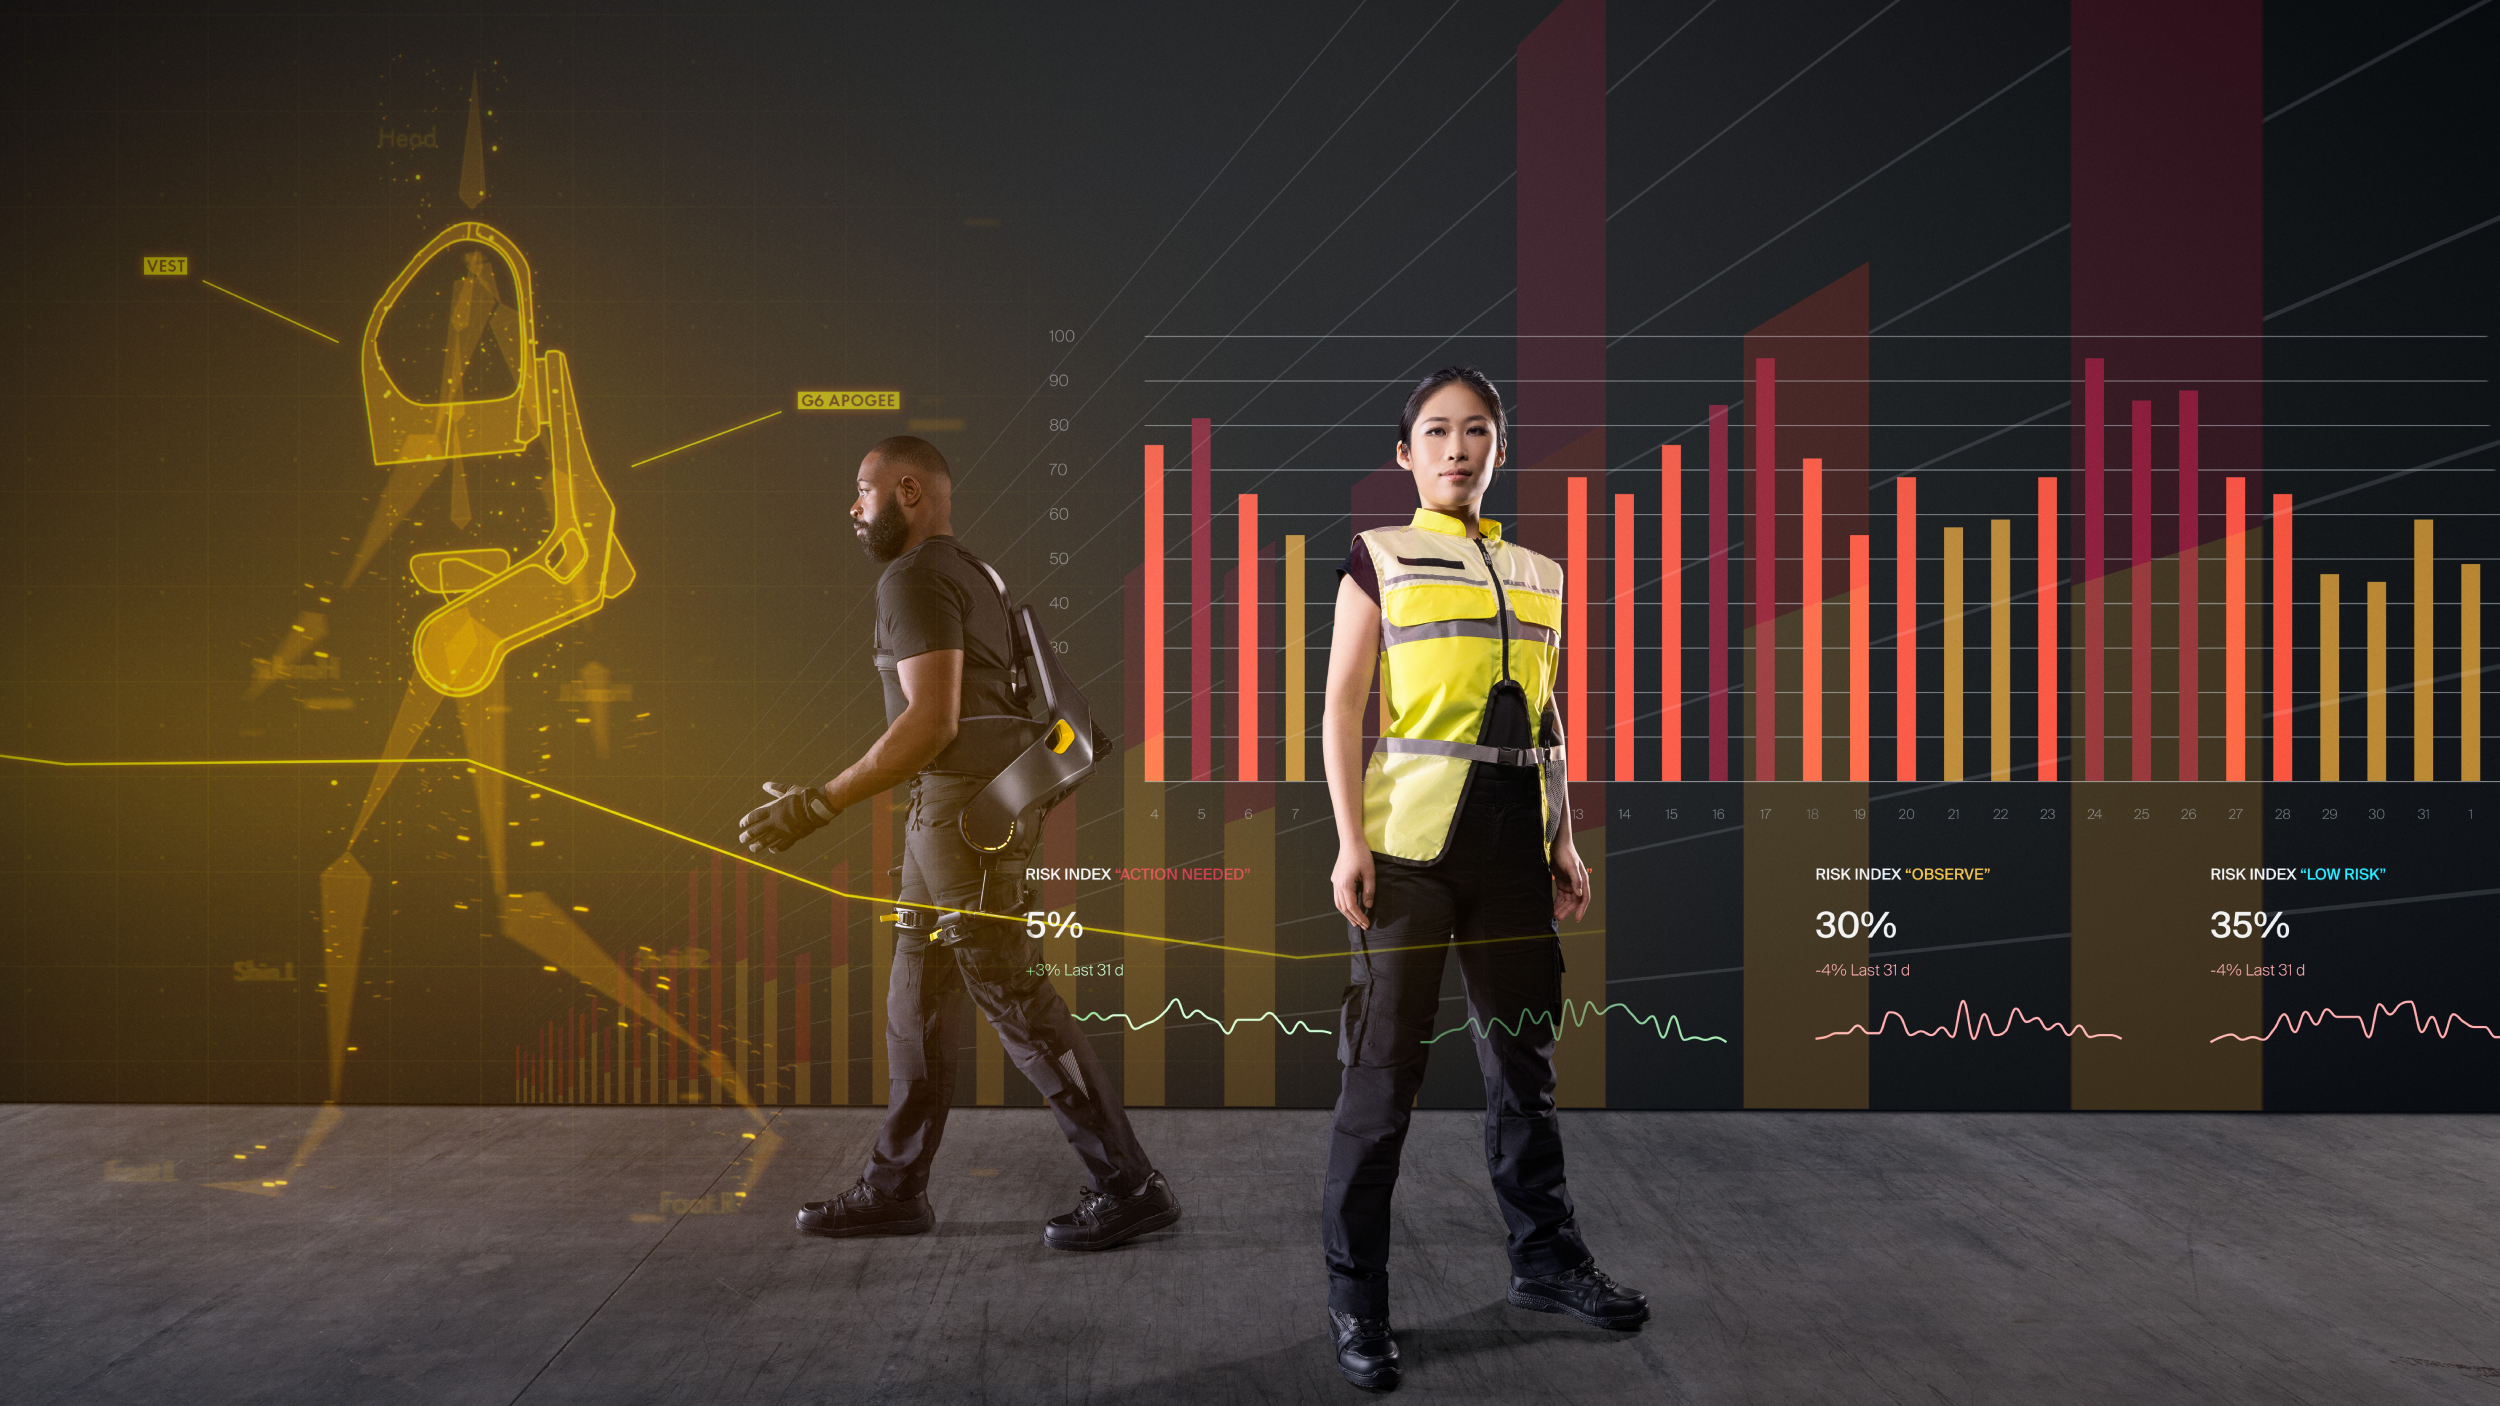 two models wearing the exosuit and vest standing against a cgi background with a bunch of graphs and stuff? I dunno. Either way, hope your day's going well.